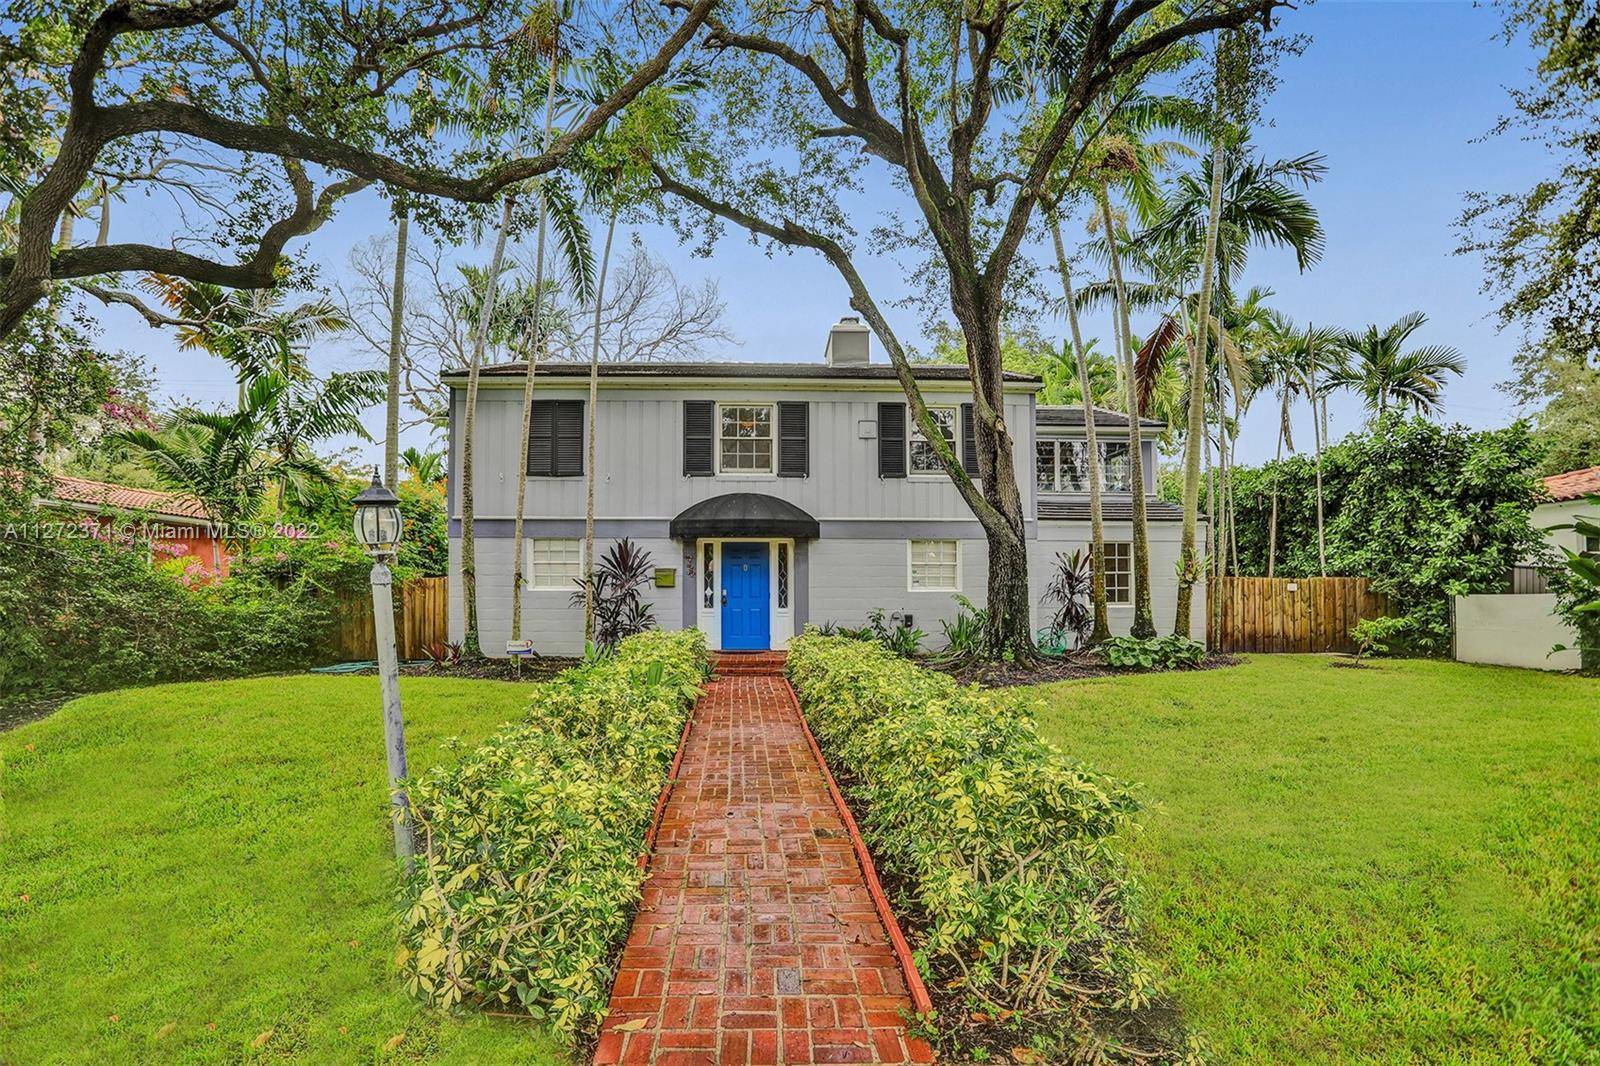 Short drive to downtown business district and Miami Beach ; this gorgeous 2 story Miami Shores home features 5 bdrm 3 bthrm and sits on an oversized lot lined with ...